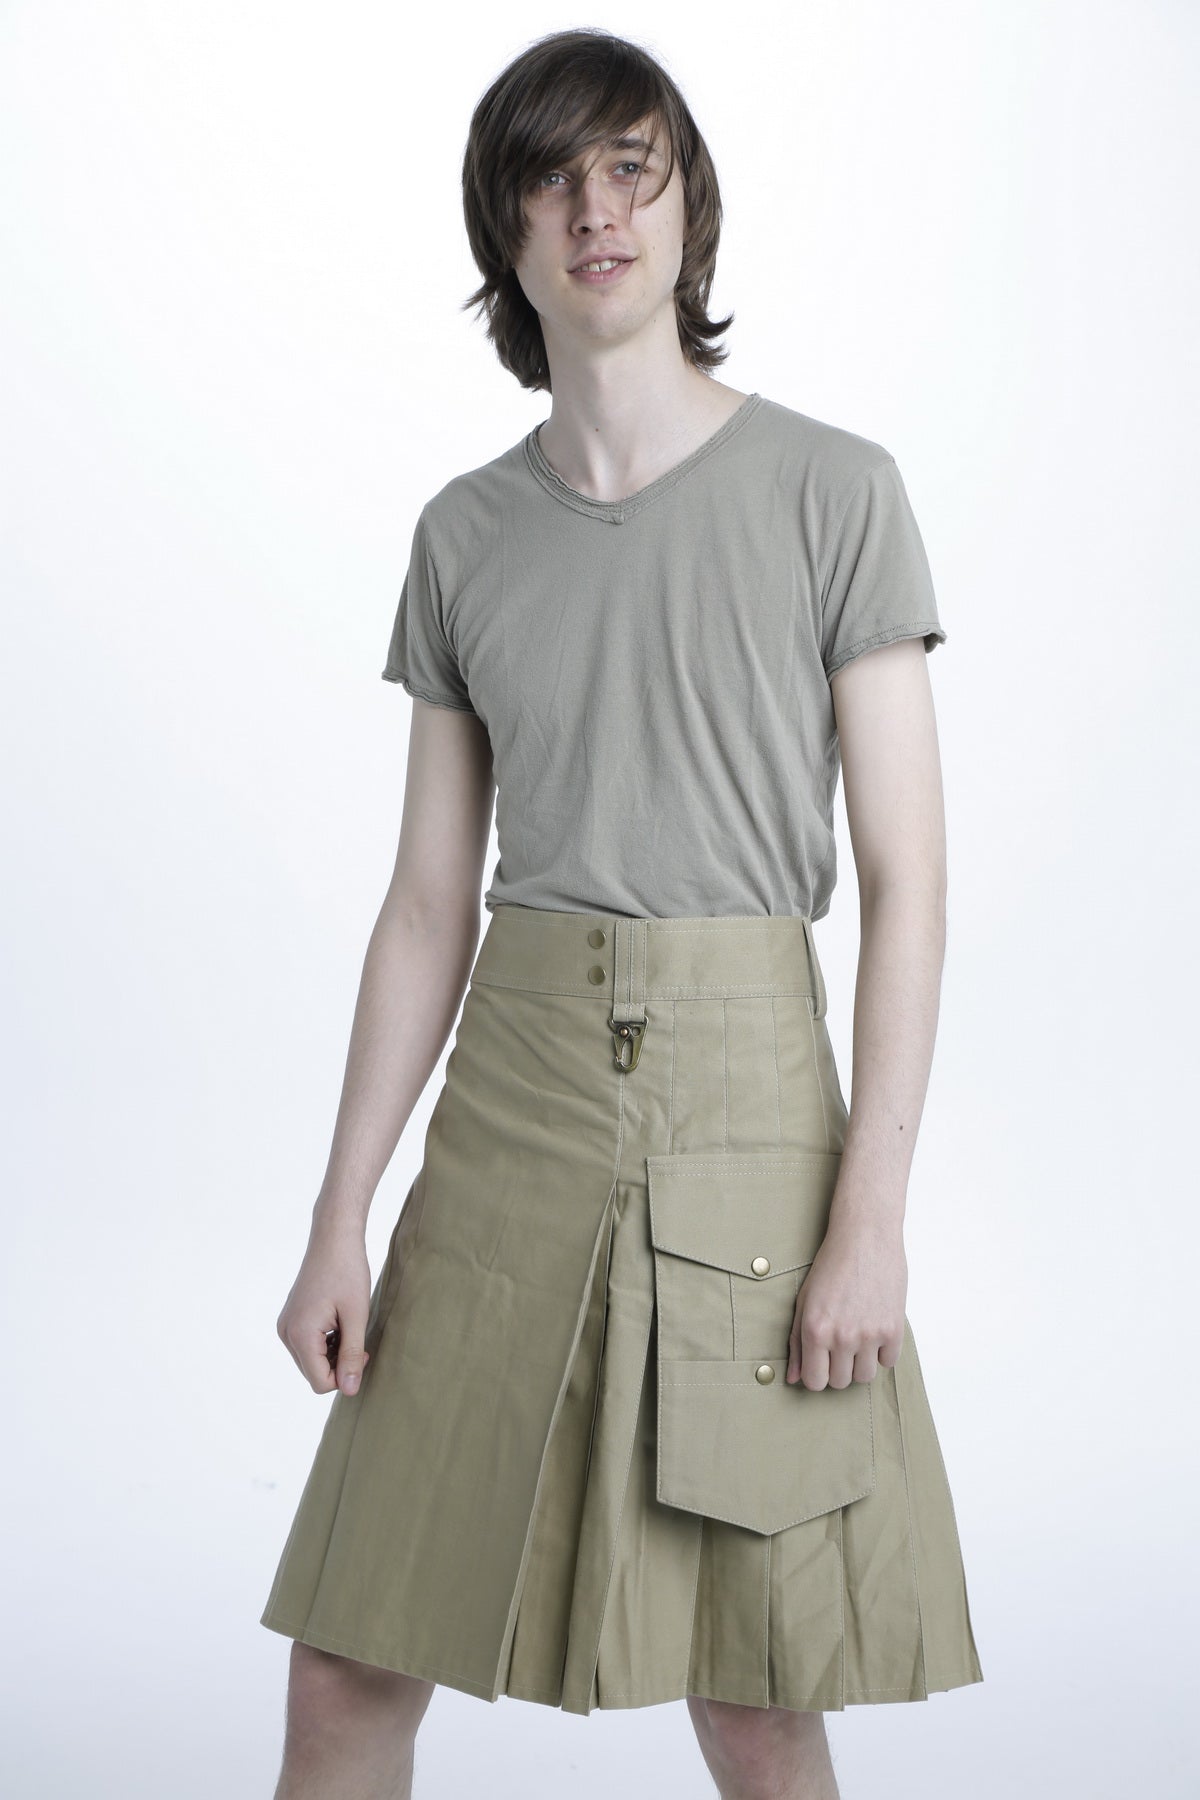 Athleisure Utility Kilt - Front side view